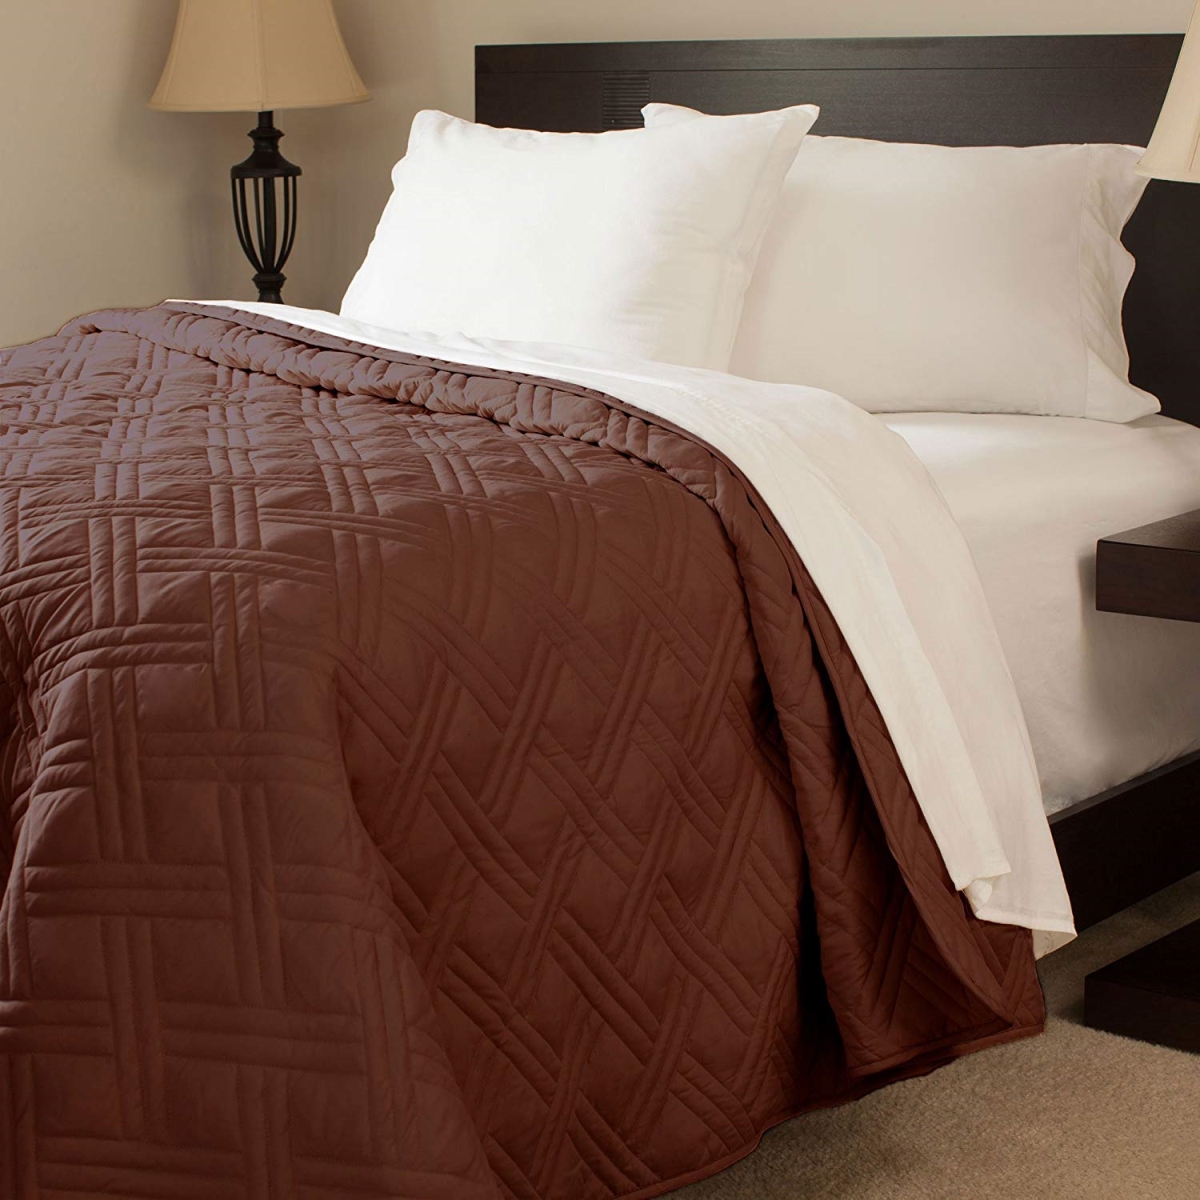 66a-25894 Solid Color Bed Quilt, Full & Queen Size - Chocolate